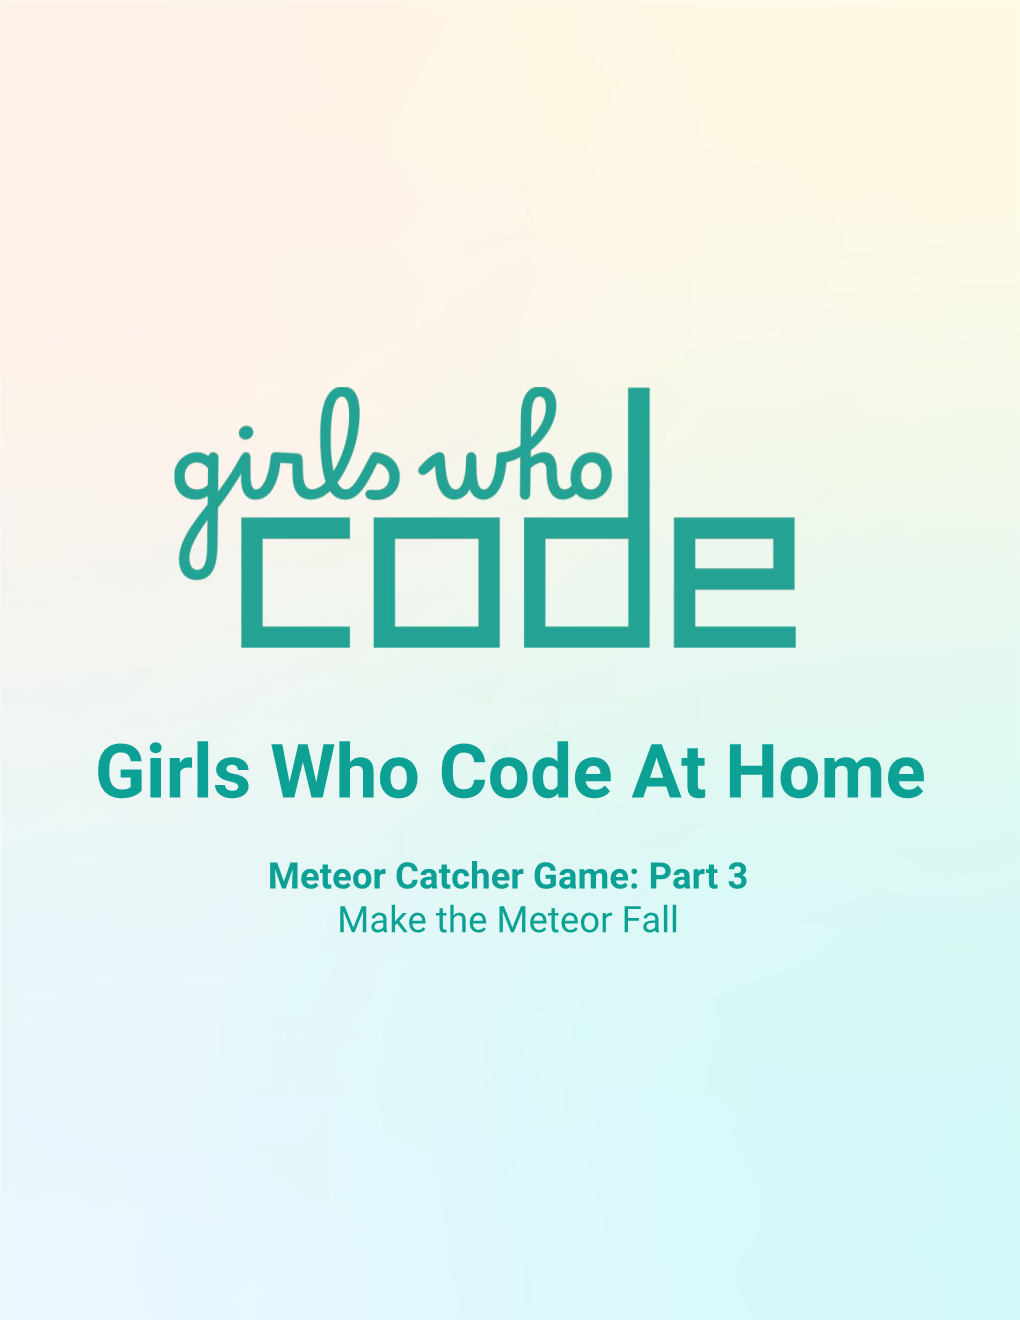 Girls Who Code at Home Meteor Catcher Game